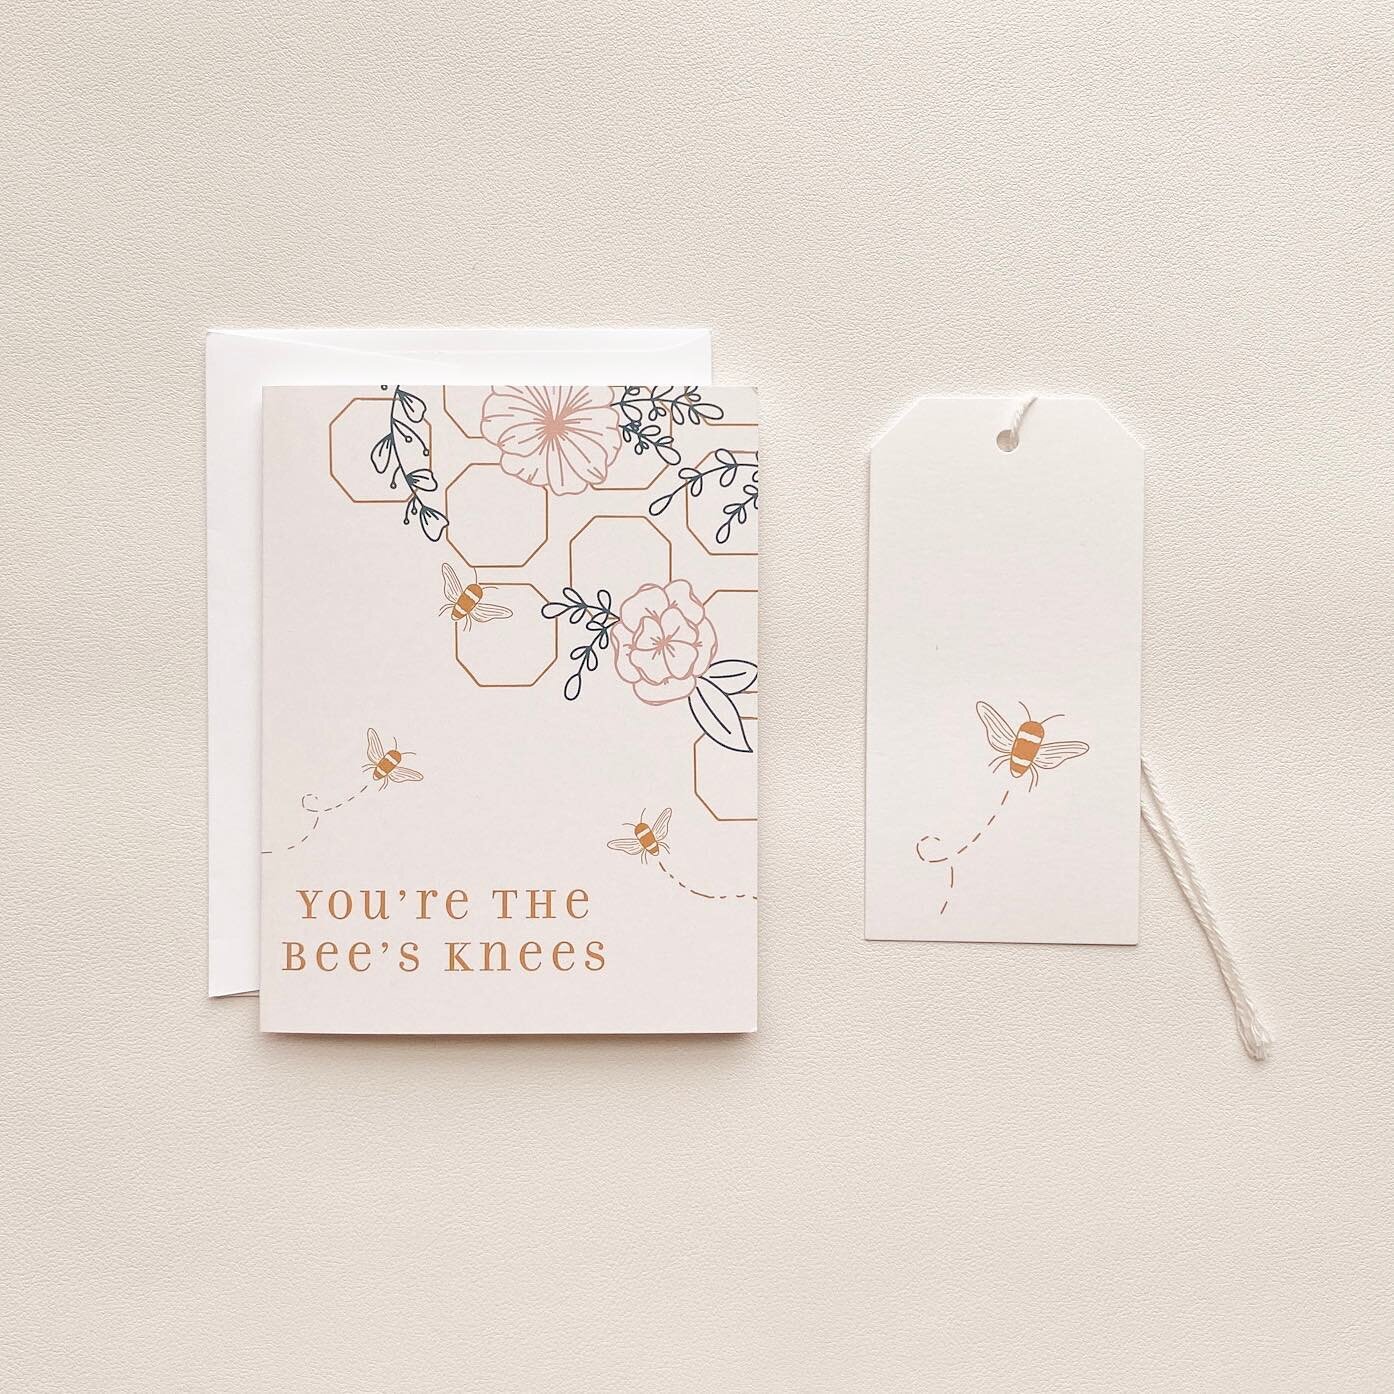 hey you &mdash; you&rsquo;re the 🐝 knees💛 grab this greeting card + gift tag set in the shop!